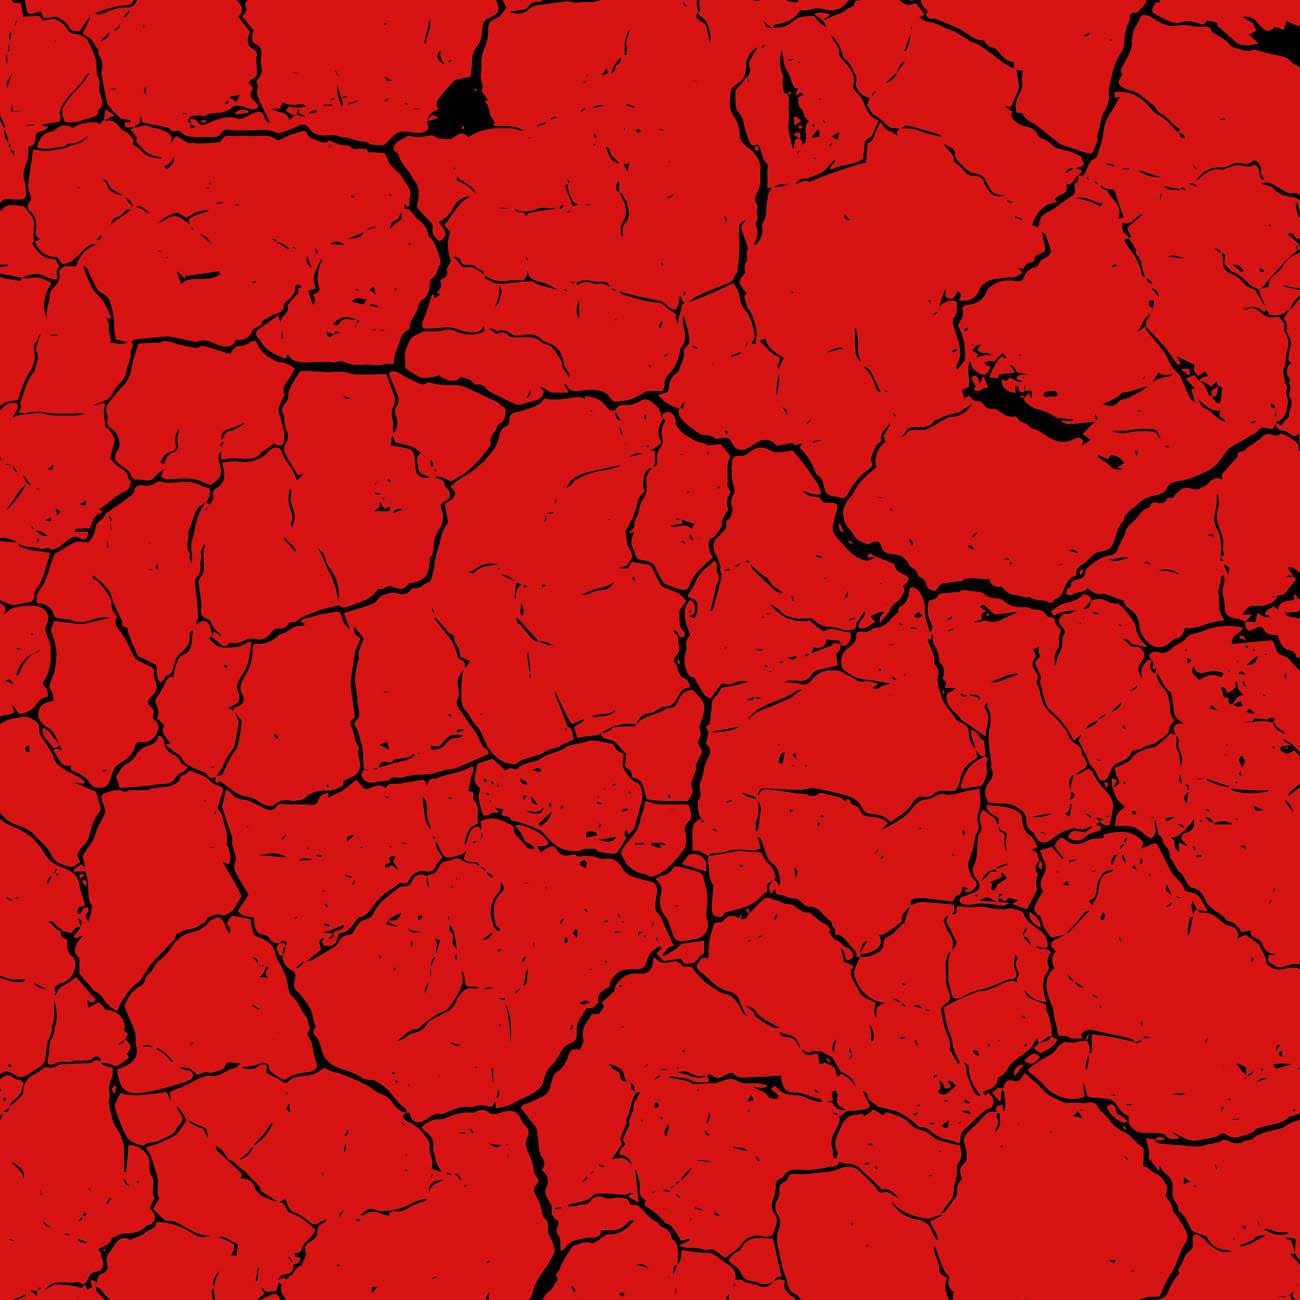 RED SCORCHED EARTH (black)